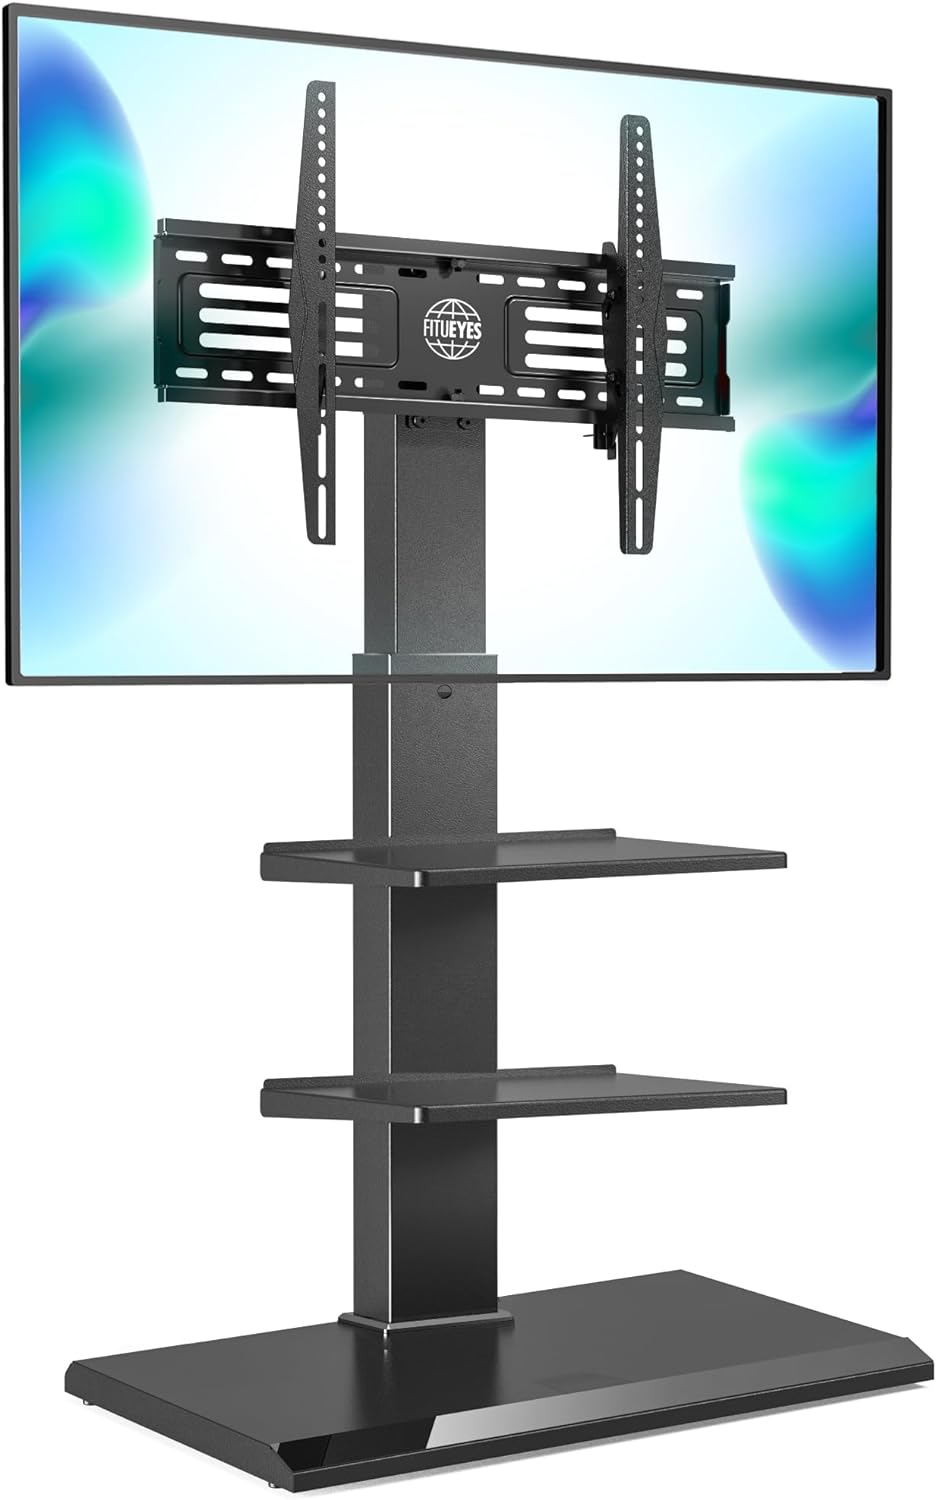 FITUEYES Iron Base Universal Floor TV Stand Swivel Tilt Mount TV Stand Base for 32-75 Inch TVs Corner TV Stand with Height Adjustable Entertainment Shelves Wire Management (Black)